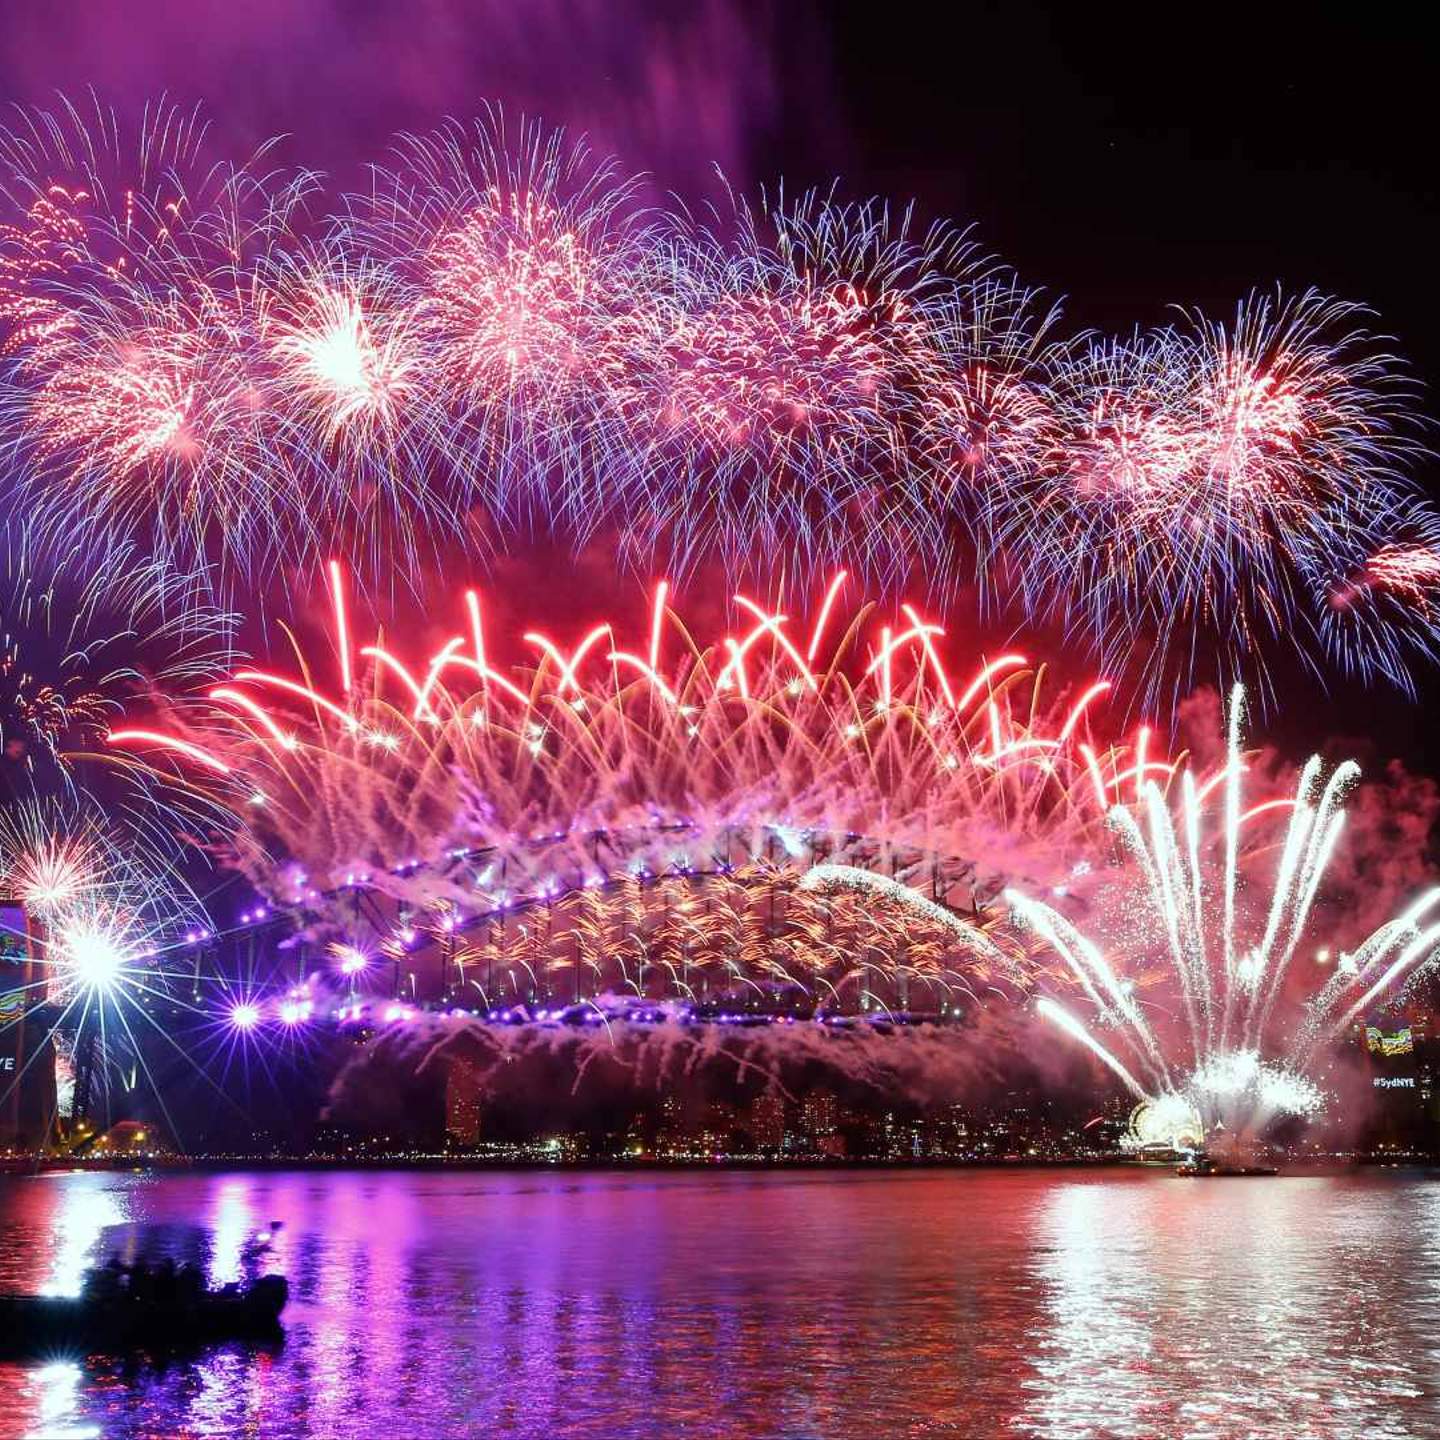 Sydney S 9pm New Year S Eve Fireworks Have Been Cancelled For The Second Year In A Row Concrete Playground